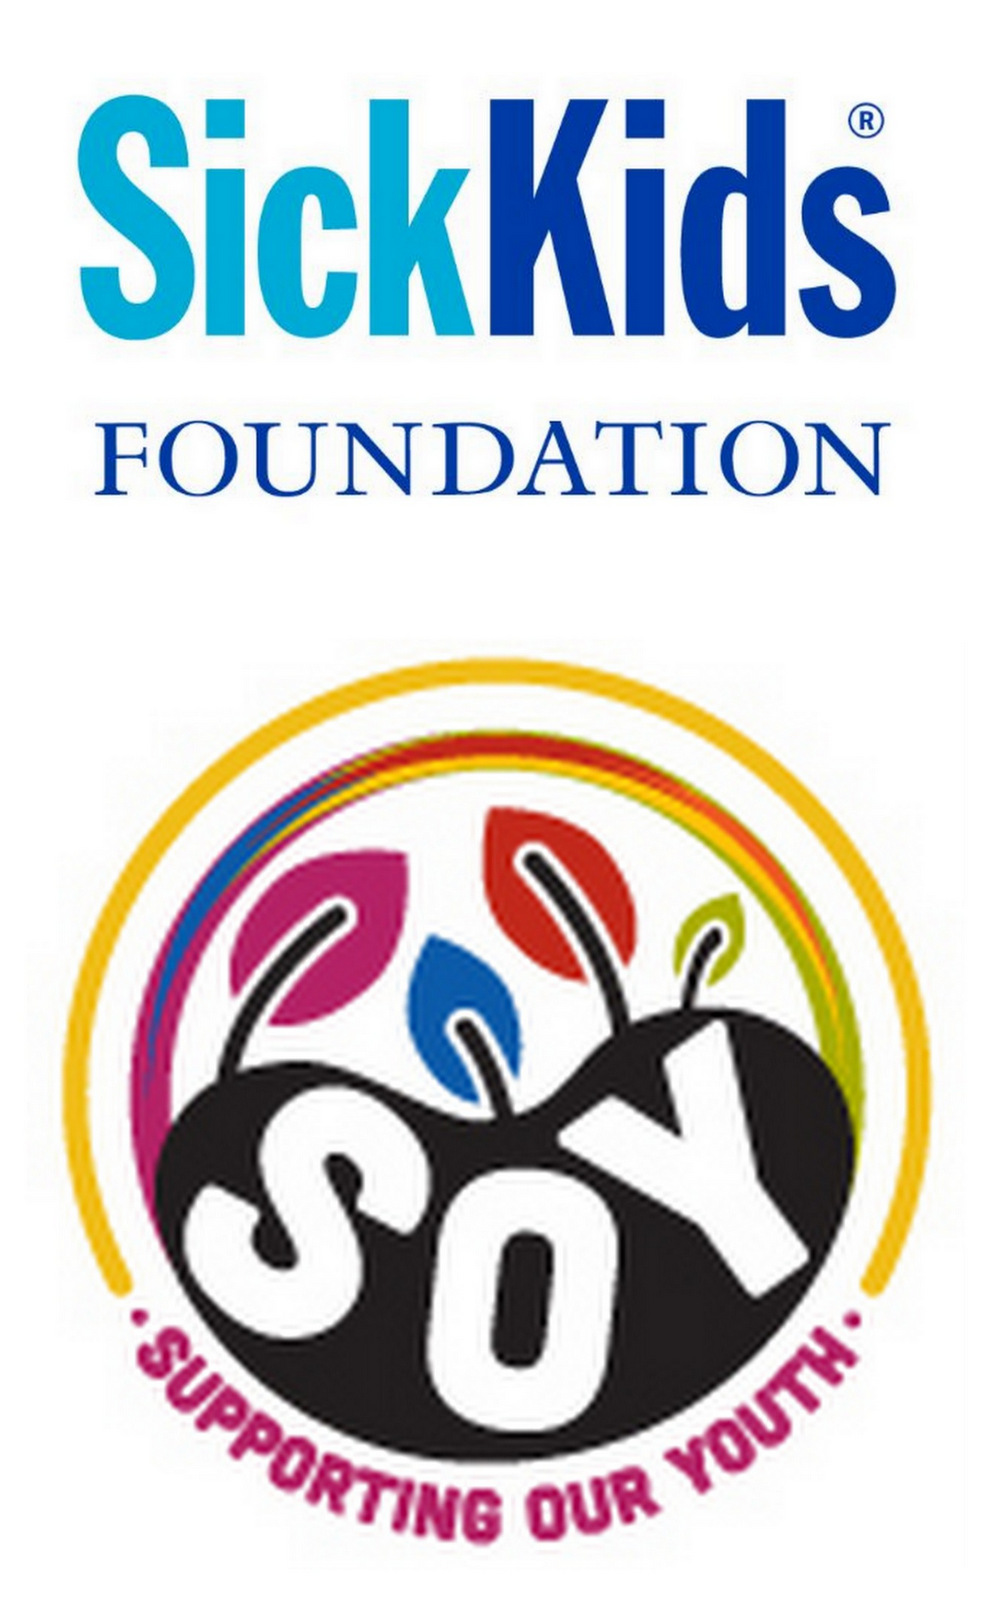 Sick Kids Hospital and Supporting Our Youth Foundation - April 2019